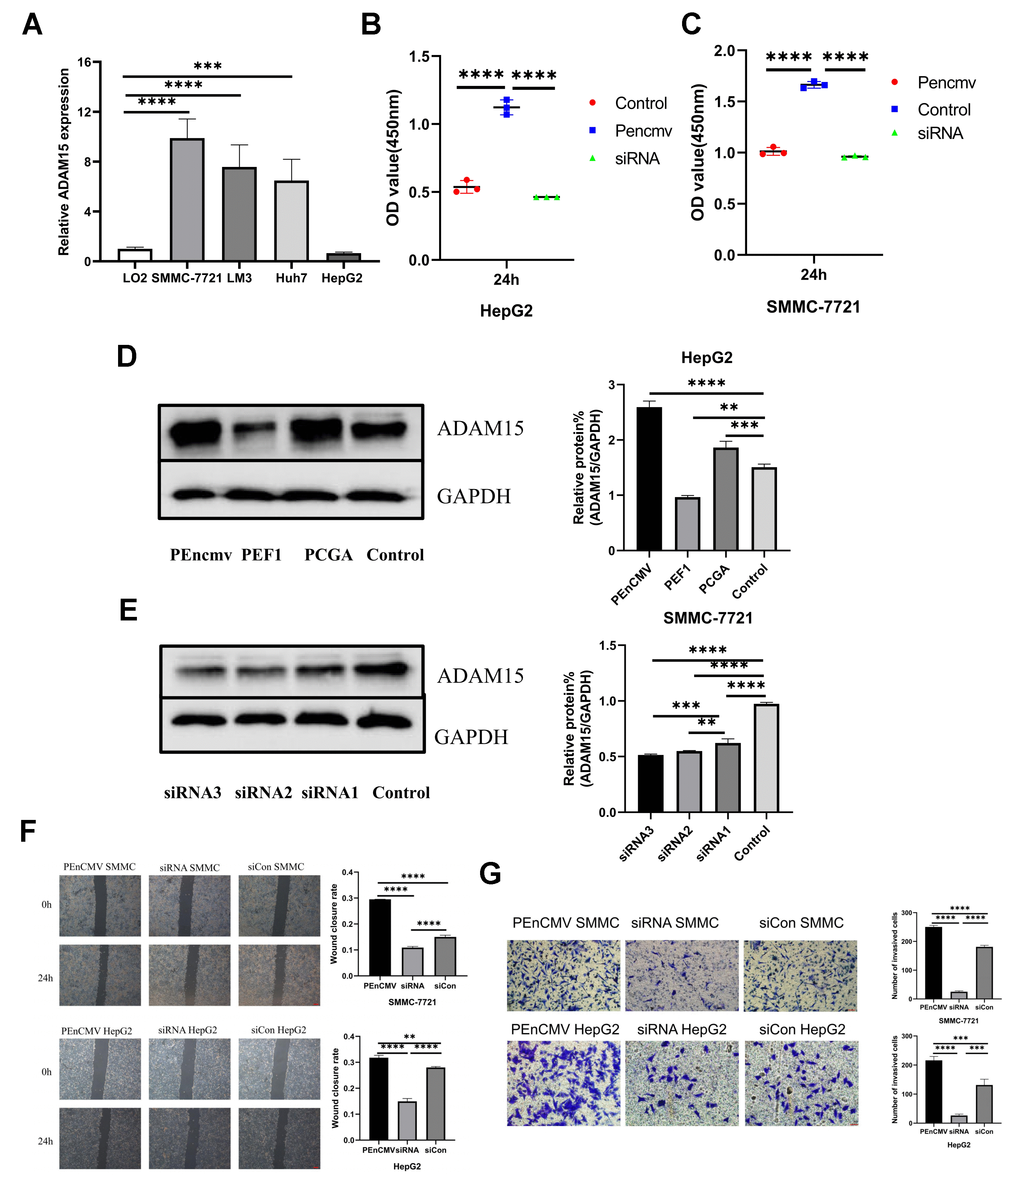 The level of ADAM15 expression was associated with the proliferation, migration and invasion of HCC cells. (A) Comparison of ADAM15 expression in HCC cells and liver cells. (B, C) Cell proliferation ability of HepG2 and SMMC-7721 cell in siCon group, siADAM15 group and ADAM15 overexpression group was examined by CCK8 assay. (D) Overexpression of ADAM15 was evaluated by western blot in HepG2 cell. (E) ADAM15 knockdown was assessed by western blot in SMMC-7721 cell. (F) Cell migration ability of HepG2 and SMMC-7721 cell in siCon group, siADAM15 group and ADAM15 overexpression group was examined by a wound-healing method. Magnification, x40. Scale bar: 200 μm (G) Cell invasion ability of HepG2 and SMMC-7721 cell in siCon group, siADAM15 group and ADAM15 overexpression group was evaluated by transwell assay. Magnification, x200. Scale bar: 50 μm.